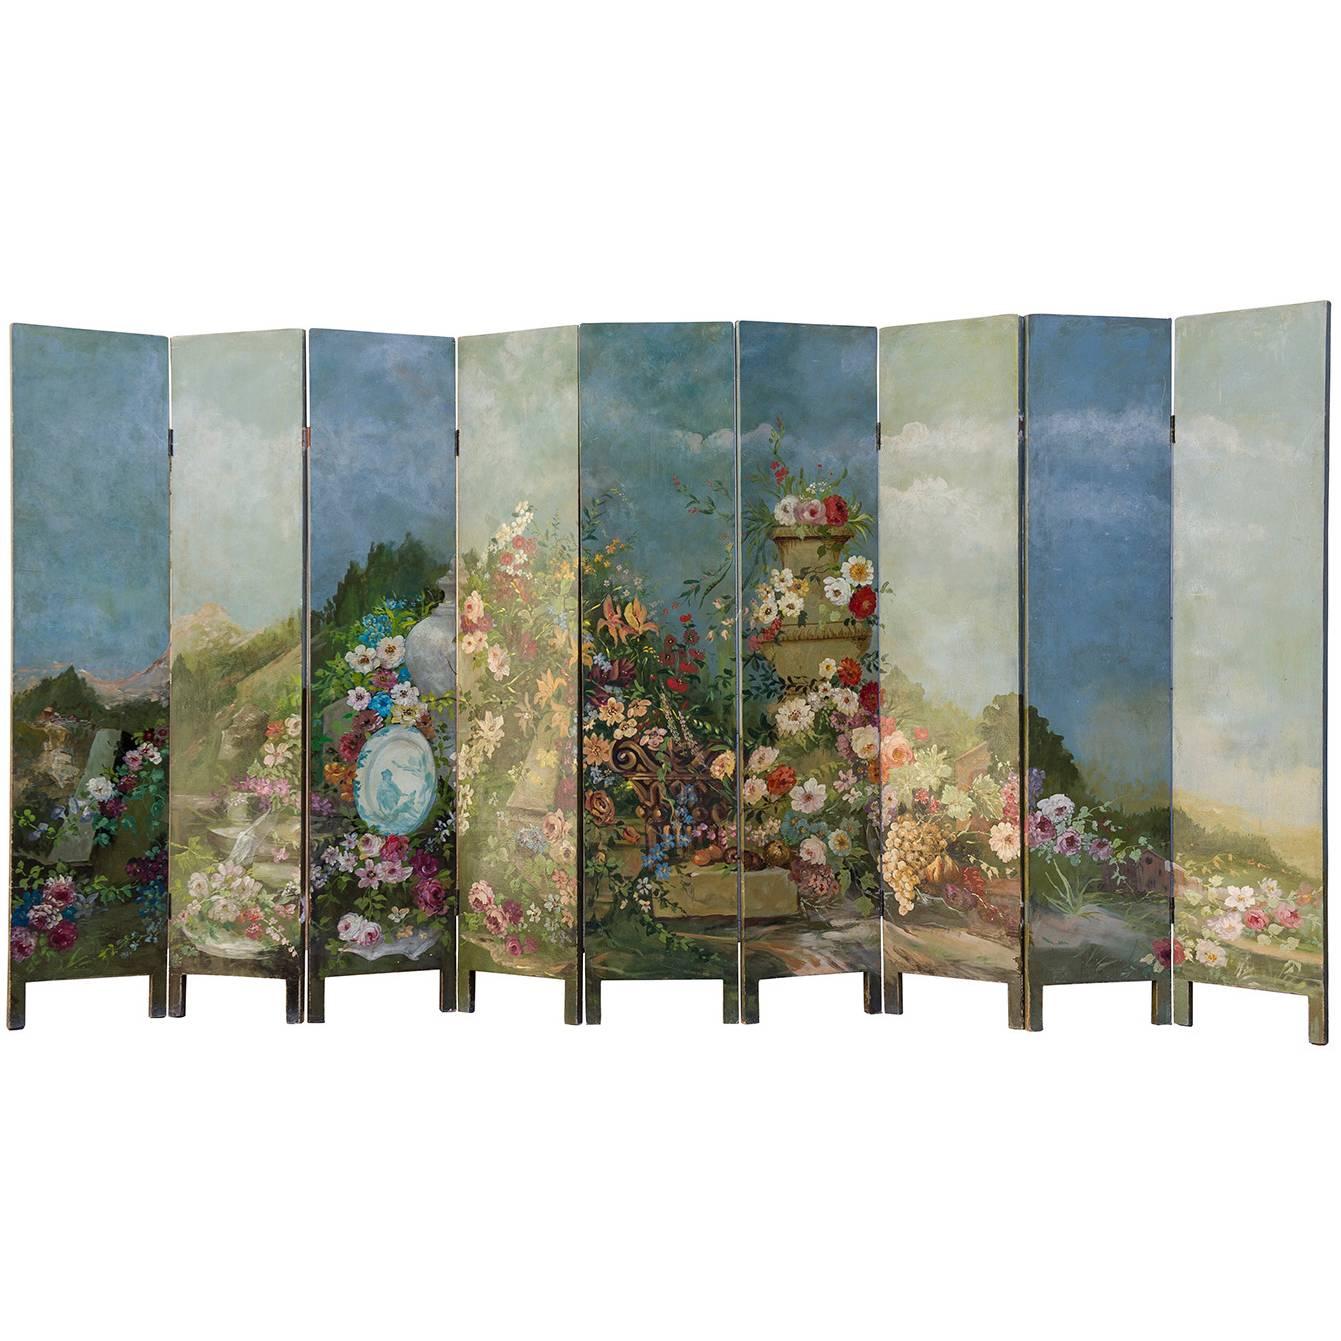 781/M - That's a wonderful very large painting!  On a side: an imaginary garden with flowers' triumph, all lacquered on 9 panels -  on the other side: some simple Chinese patterns on a light surface.
The central panel has been replaced because